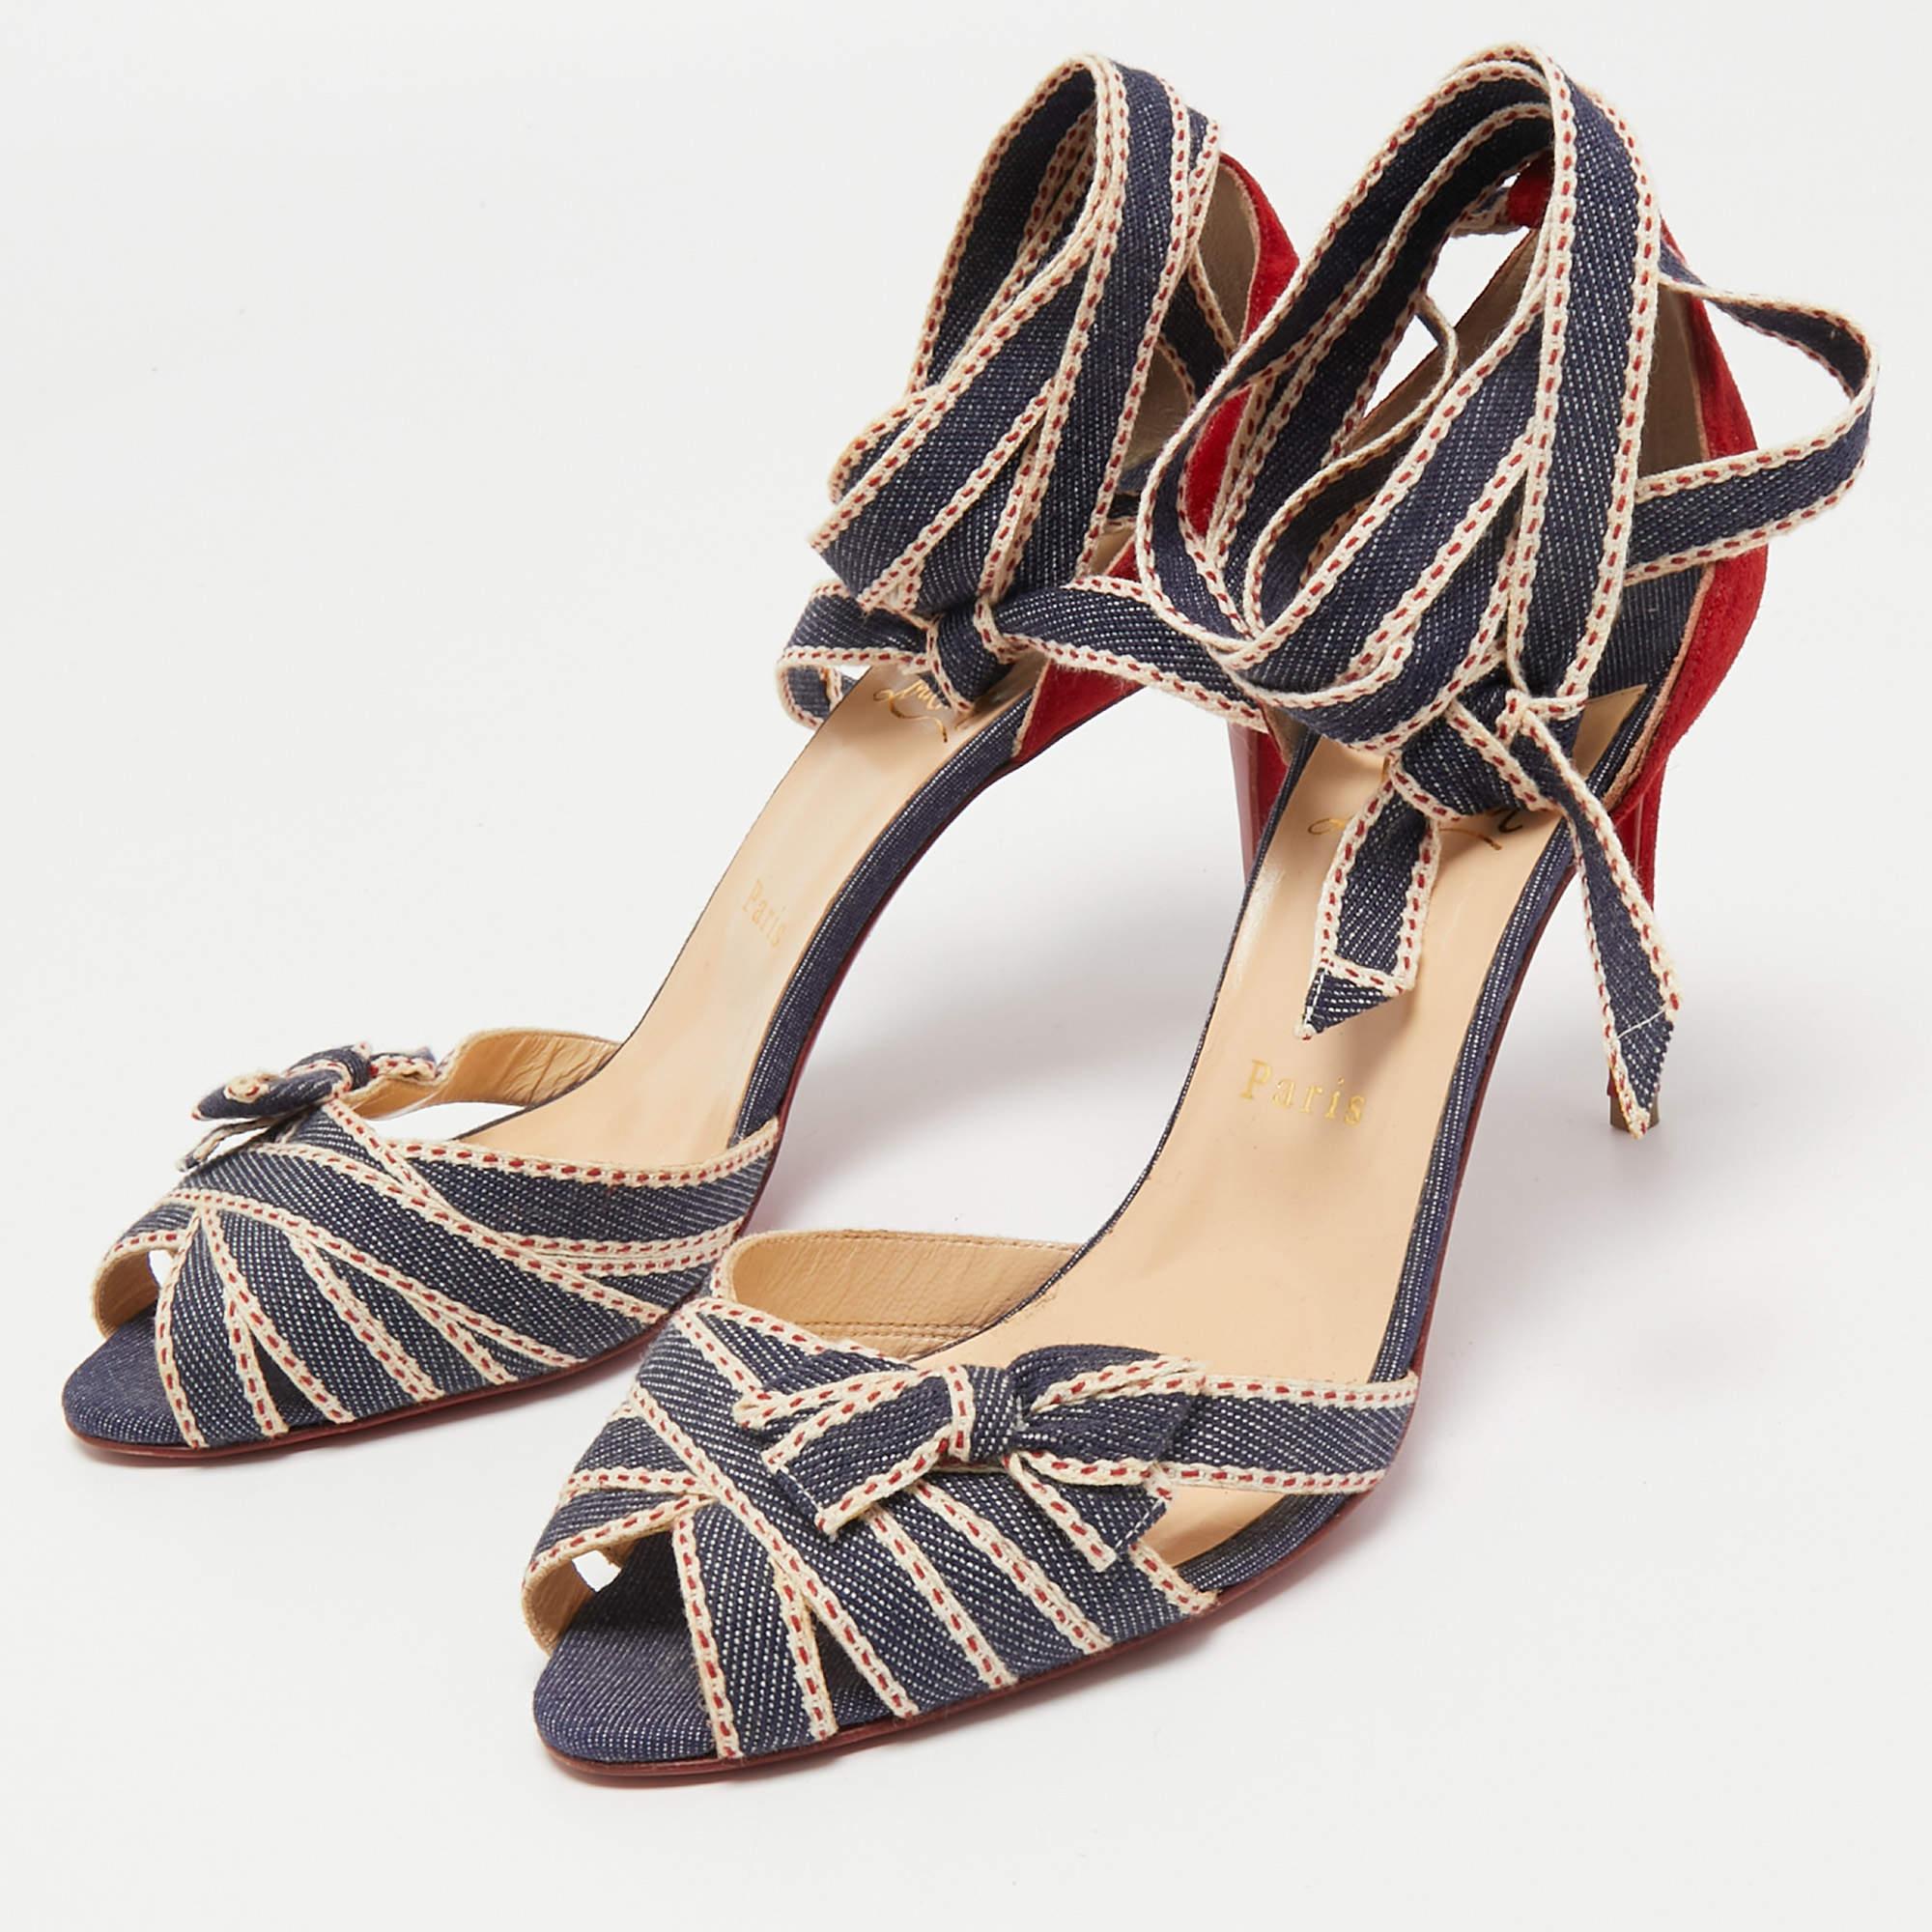 Women's Christian Louboutin Red/Blue Suede and Denim Christeriva Sandals Size 40